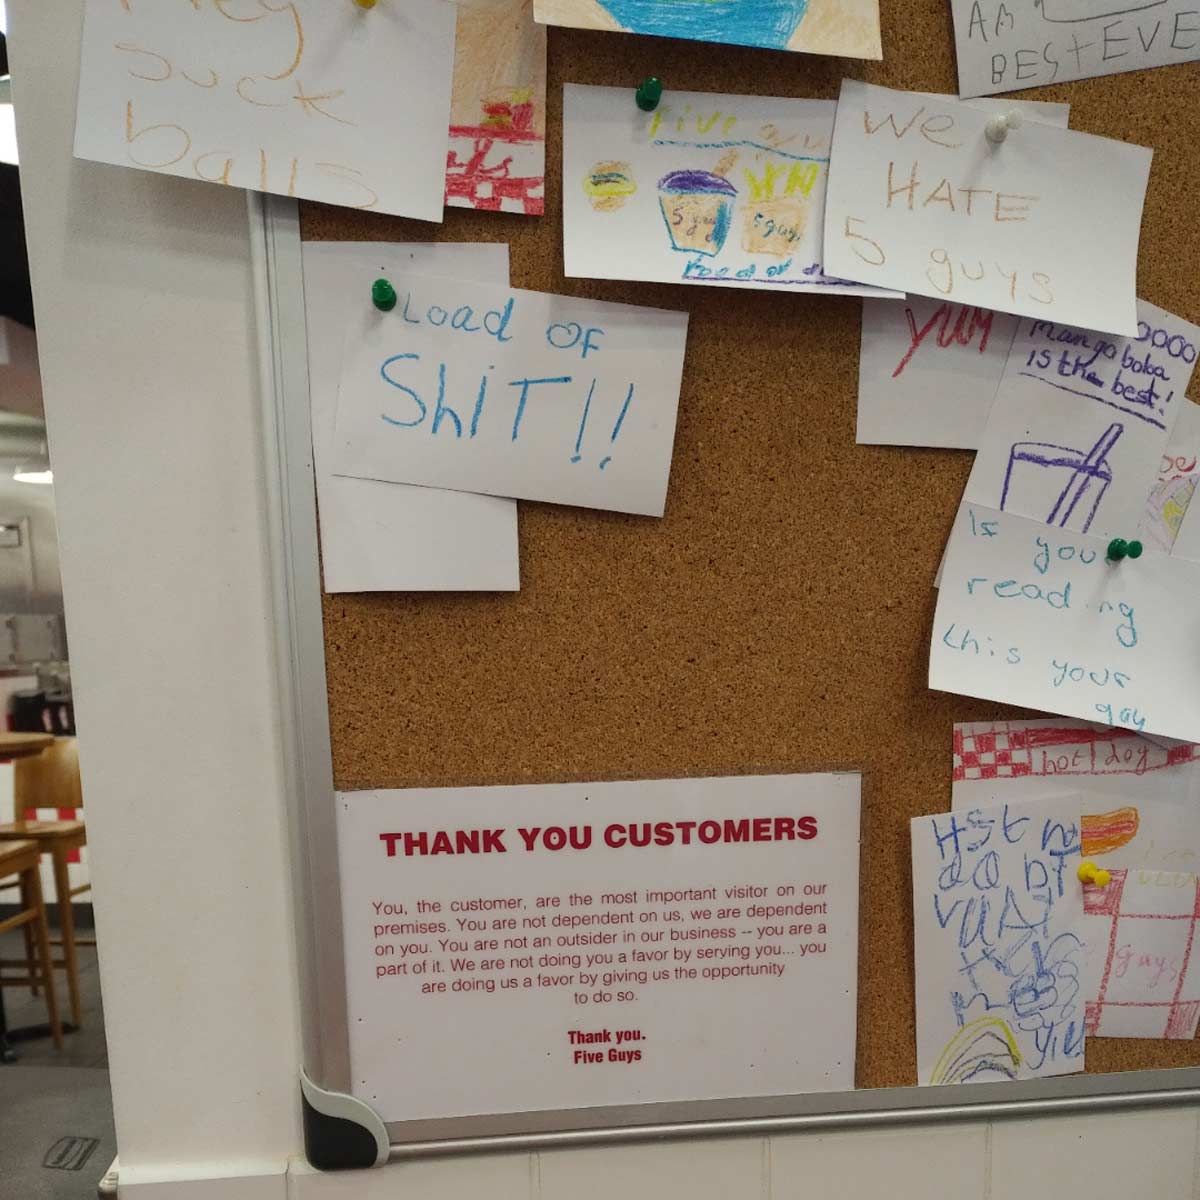 Perhaps I should have read the reviews before I ordered at Five Guys